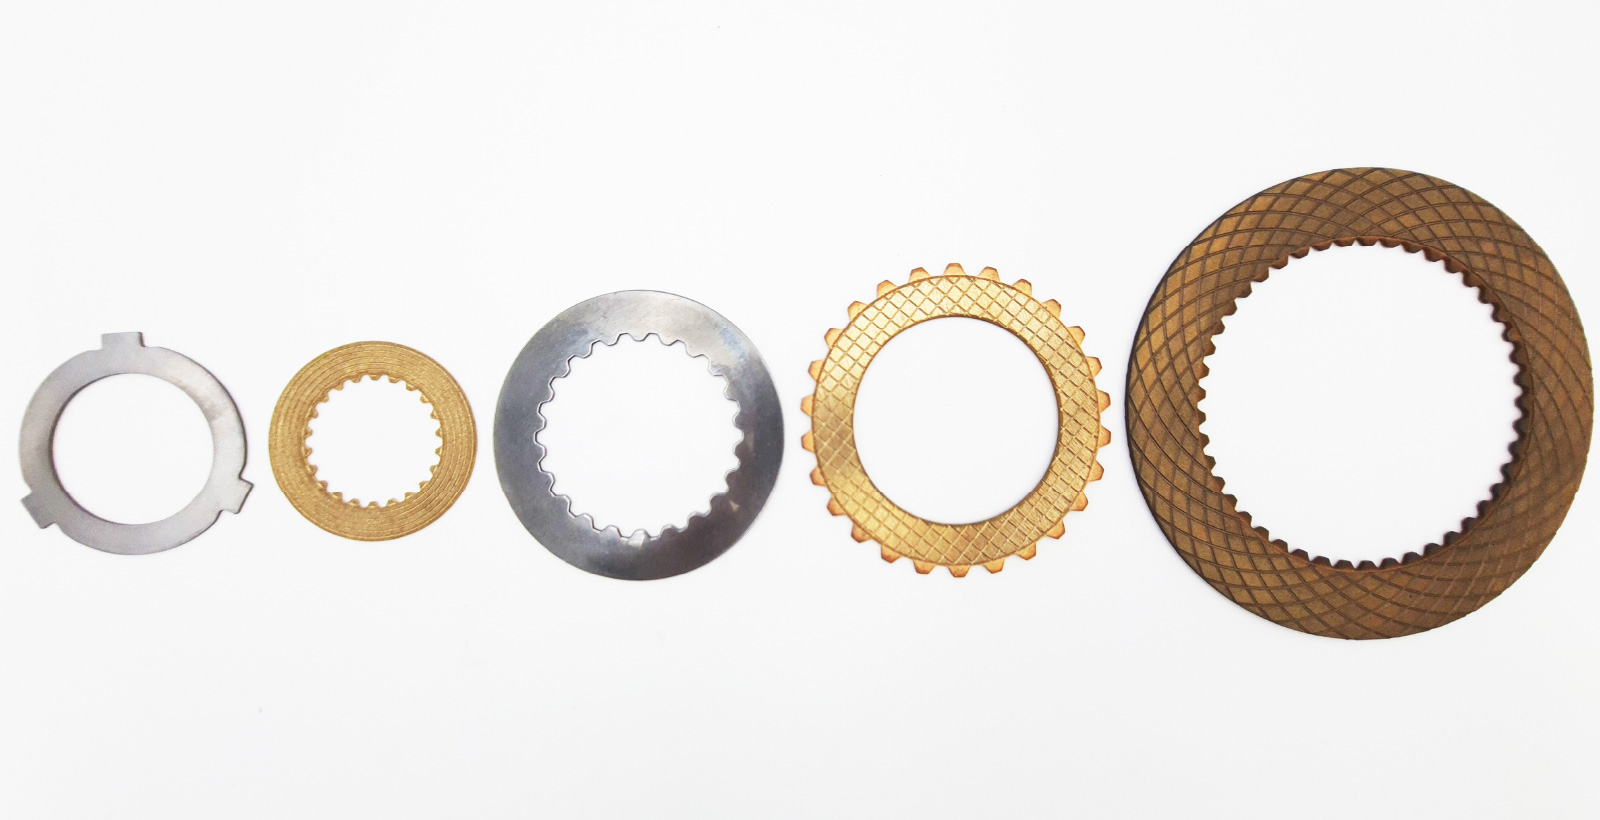 Bronze Transmission Discs for Forestry and Timber Industry